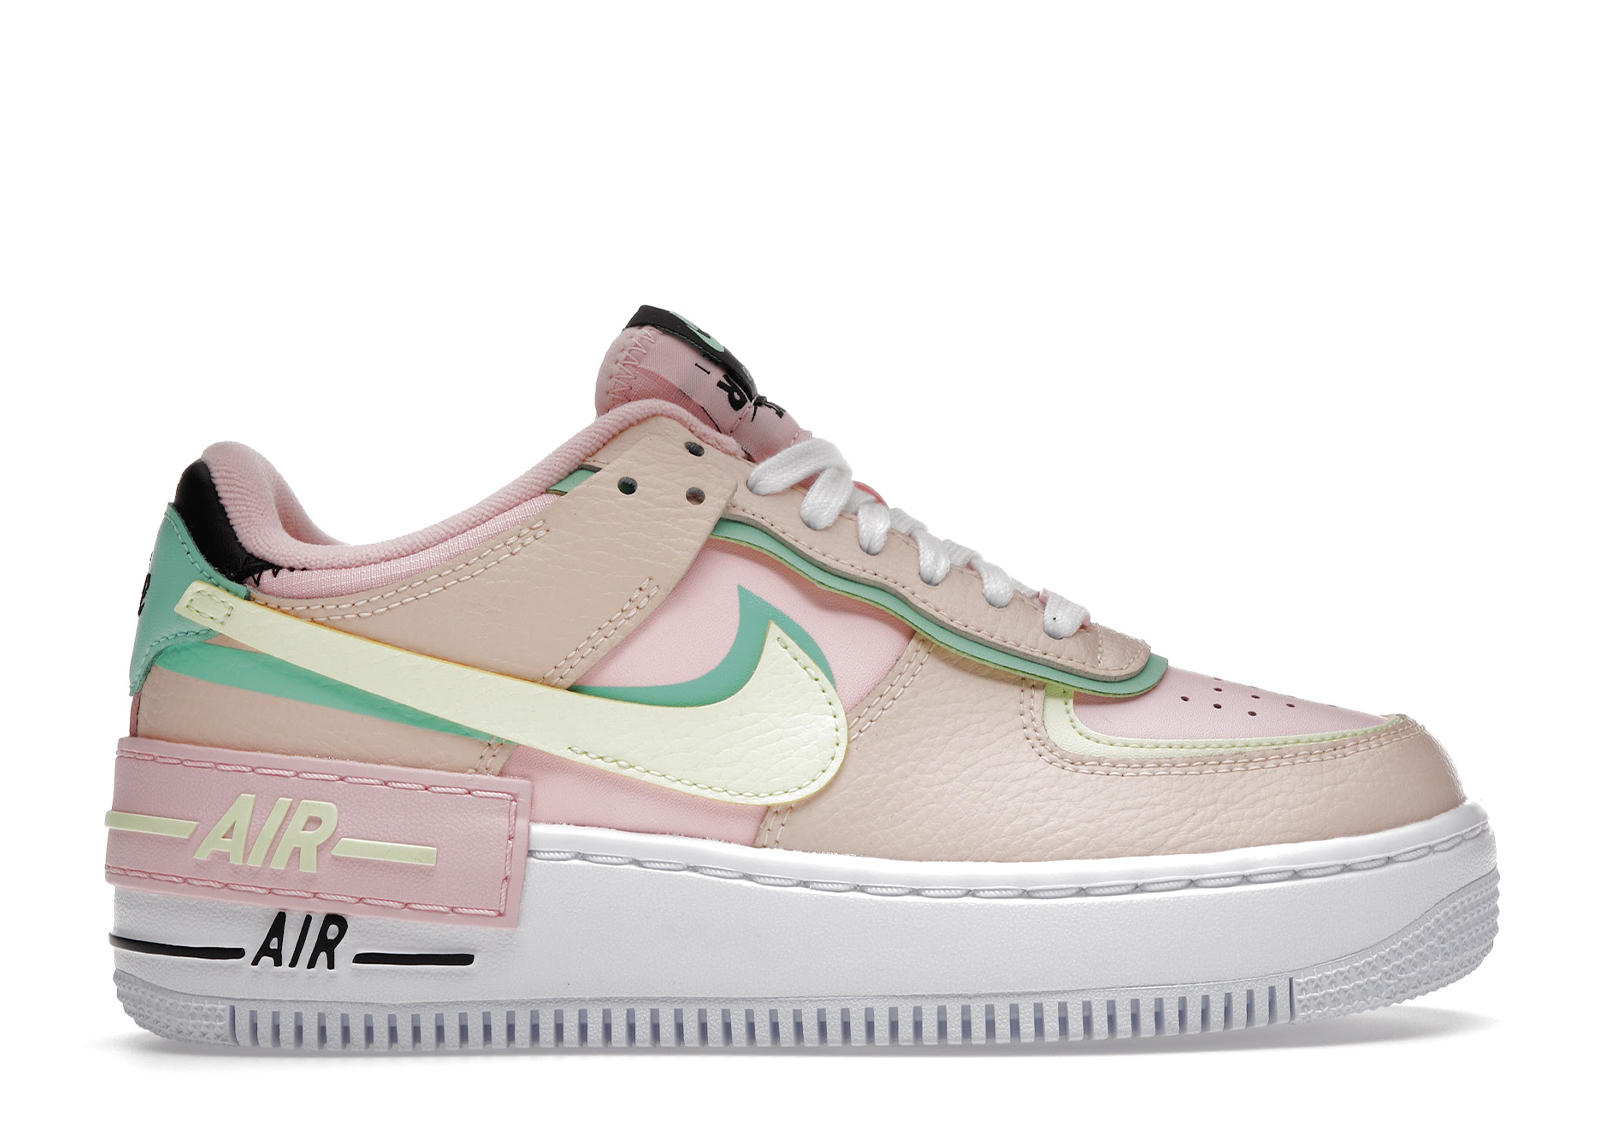 Nike Air Force 1 Low Shadow Arctic Punch (Women's) - CU8591